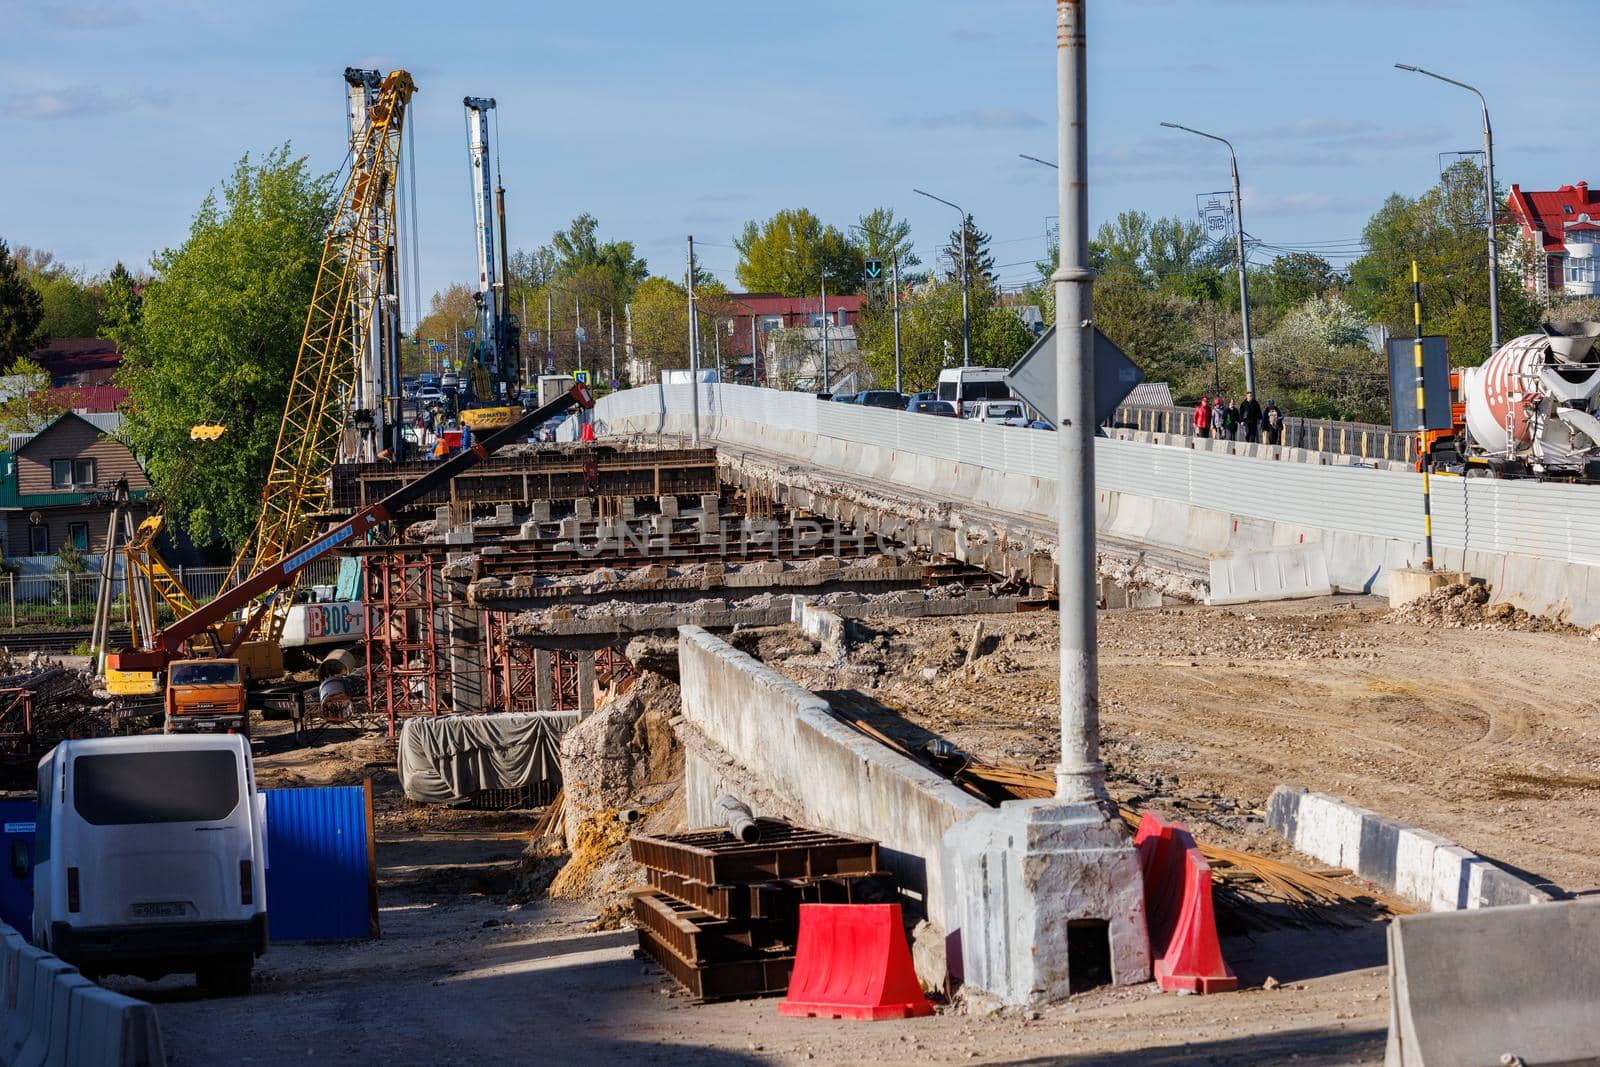 Bridge reconstruction process at summer day in Tula, Russia by z1b